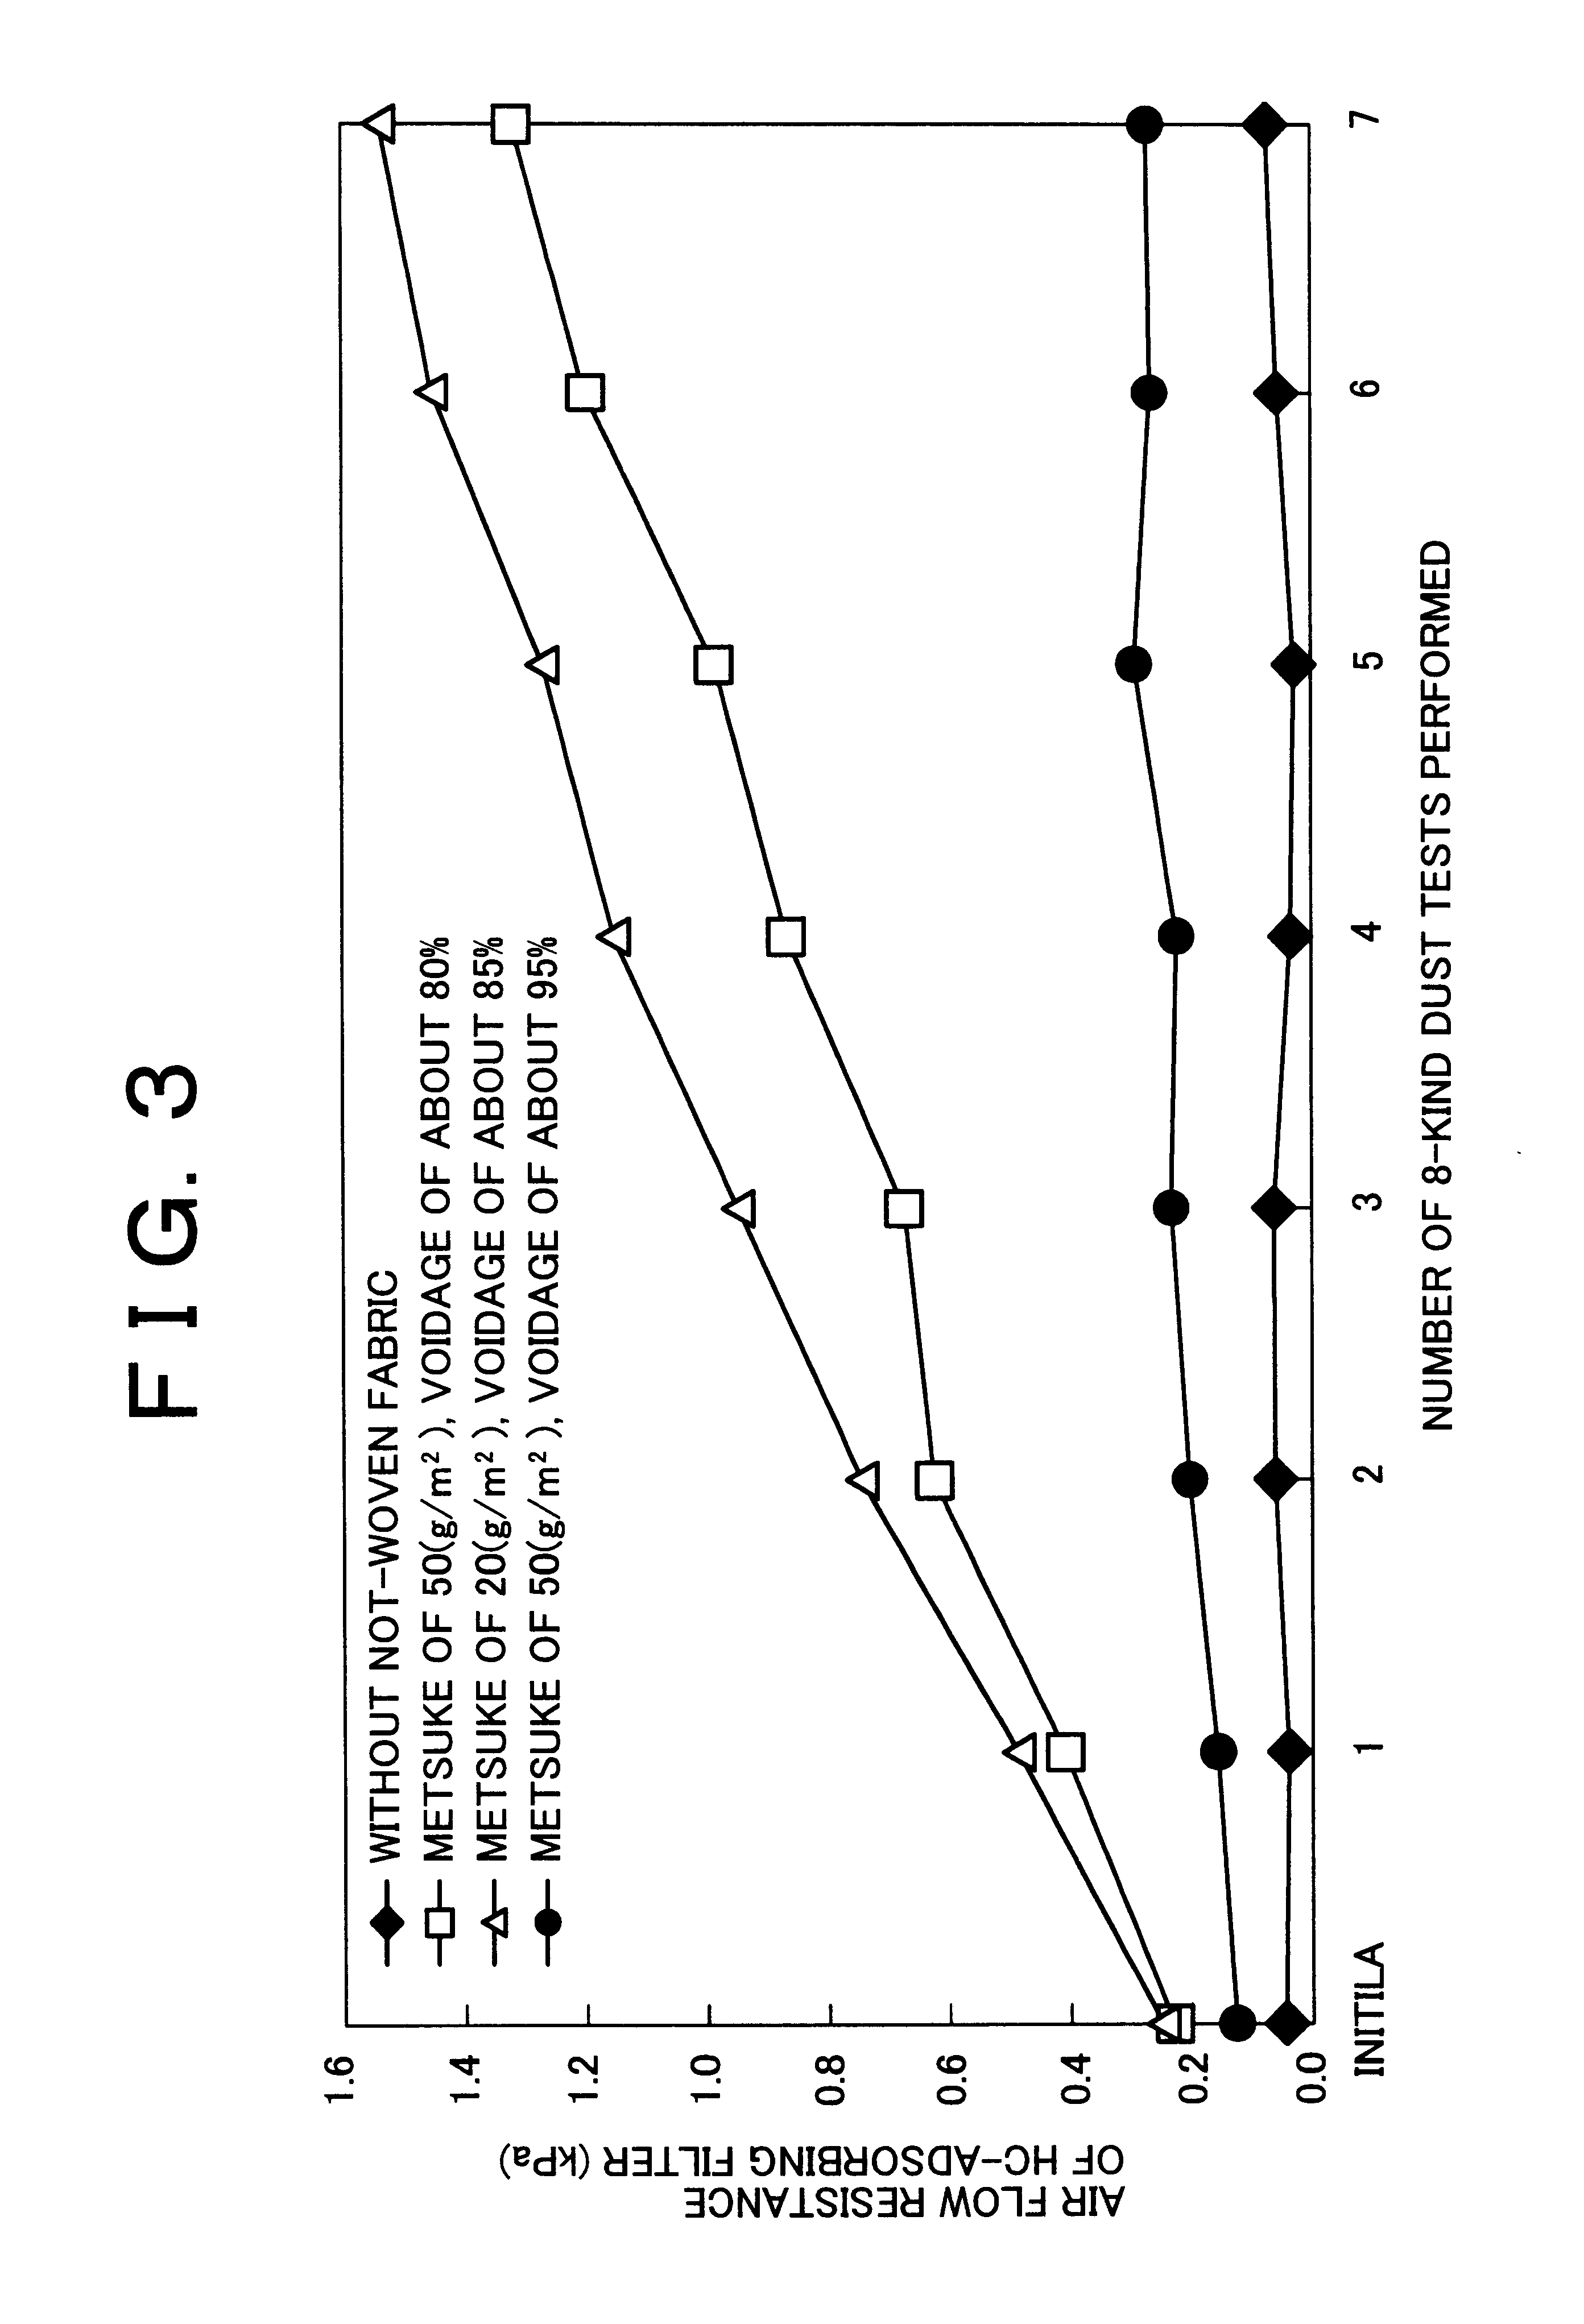 Internal combustion engine air cleaner and adsorption filter